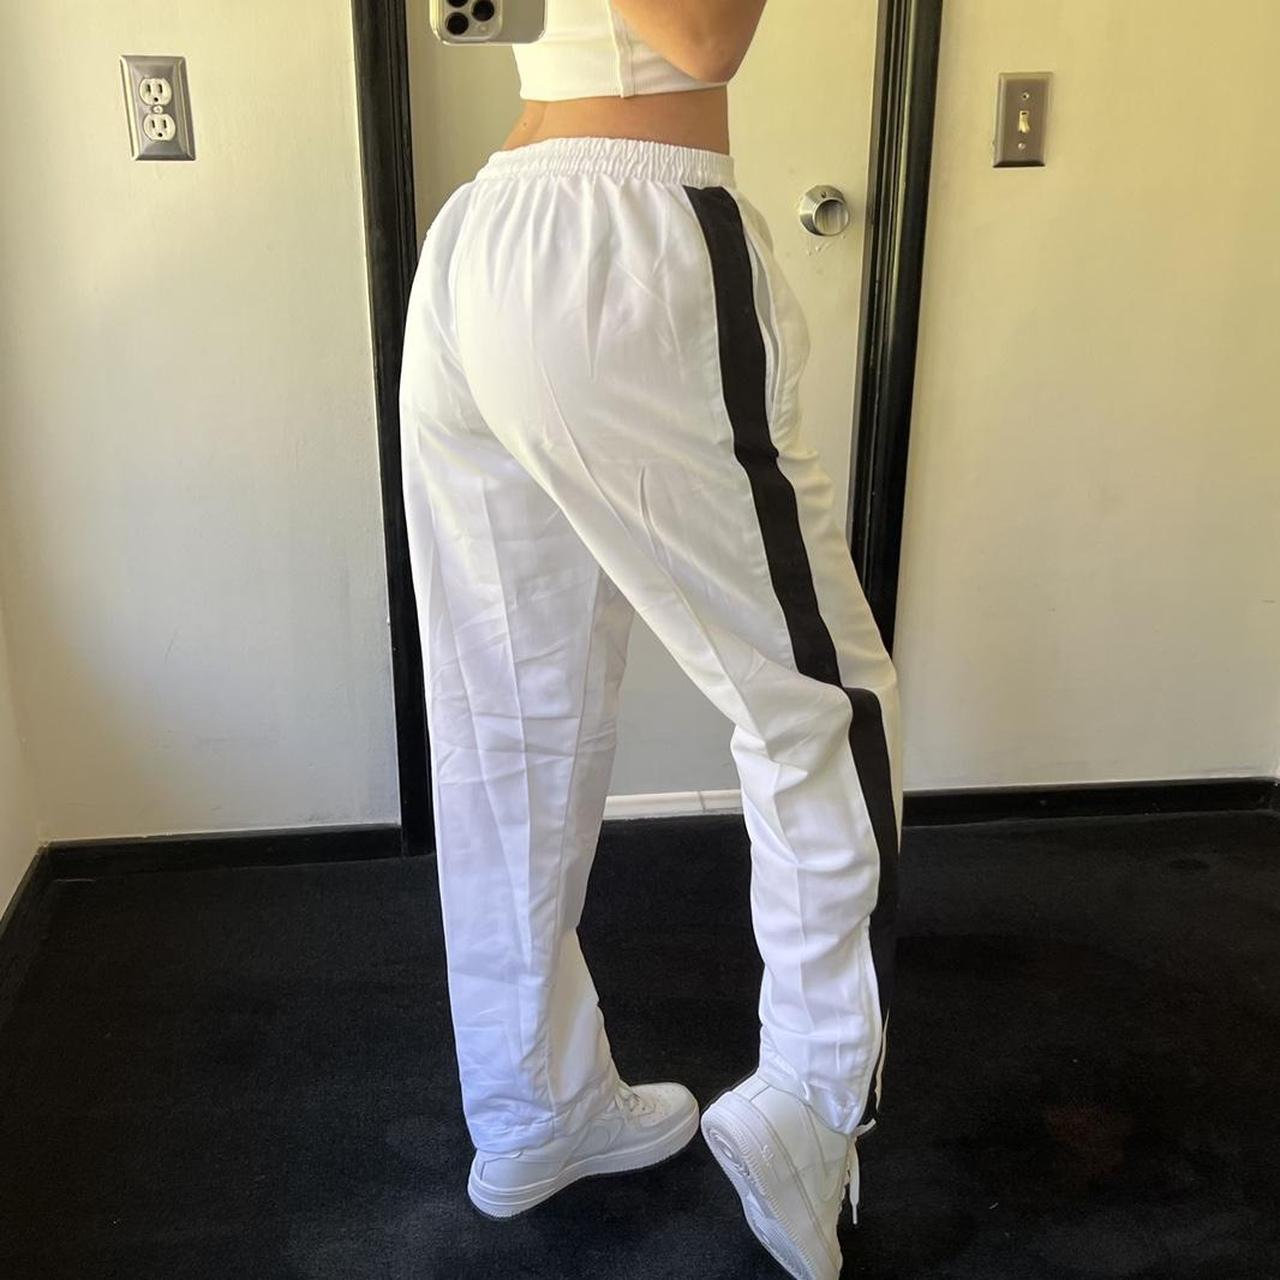 Product Image 3 - White and black striped sweatpants